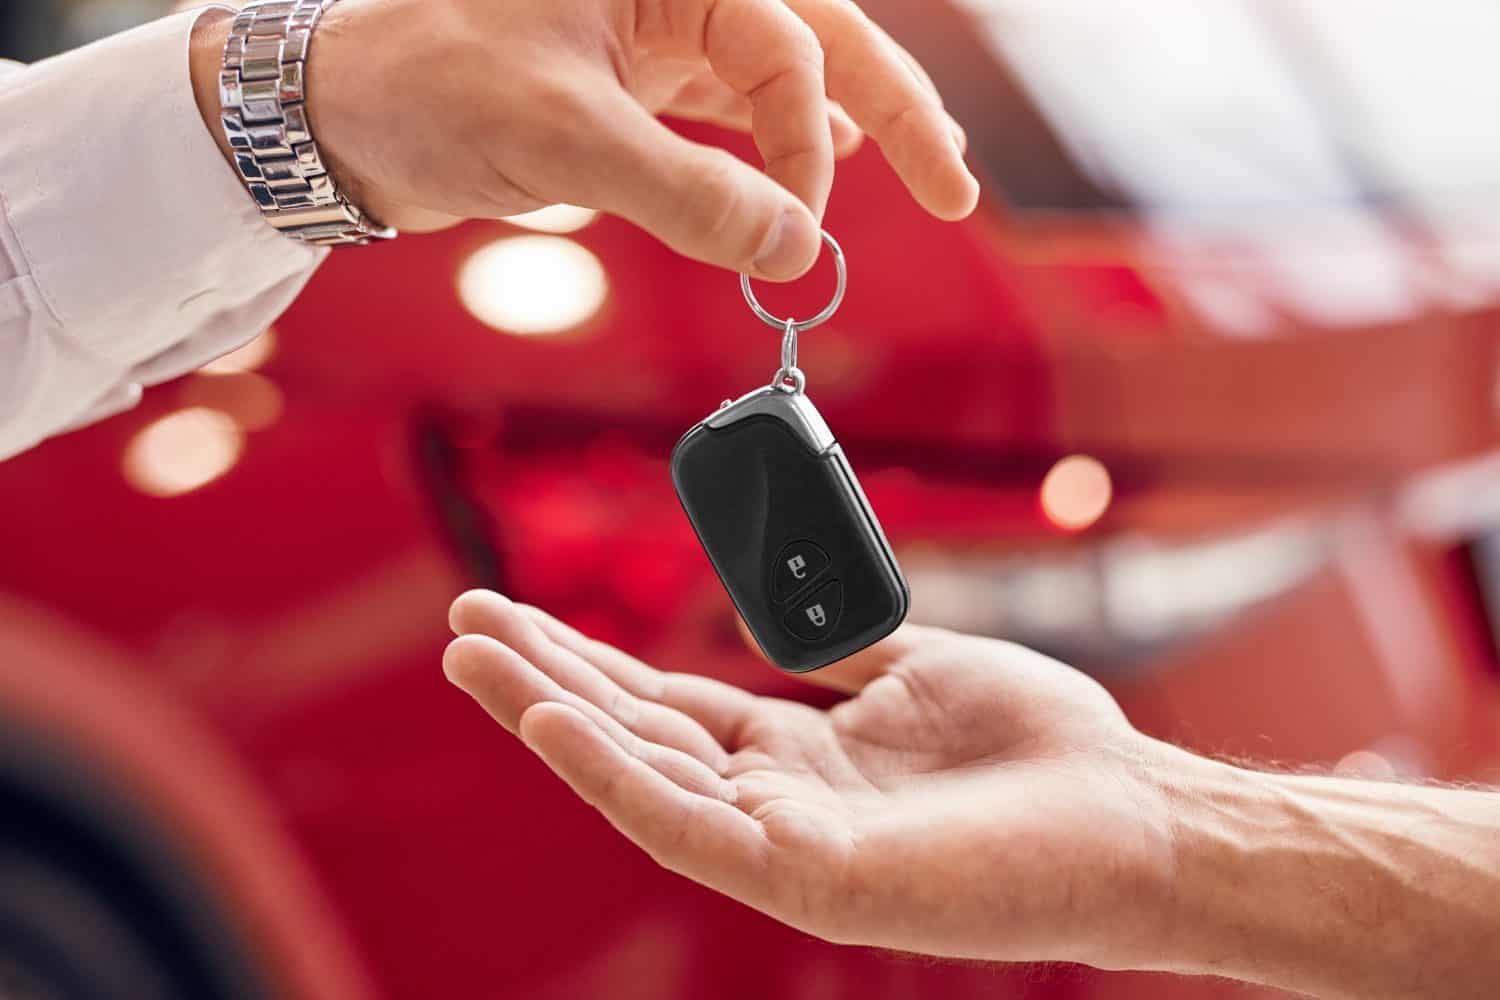 Unrecognizable client receiving keys of rent vehicle from manager against red vehicle in dealership